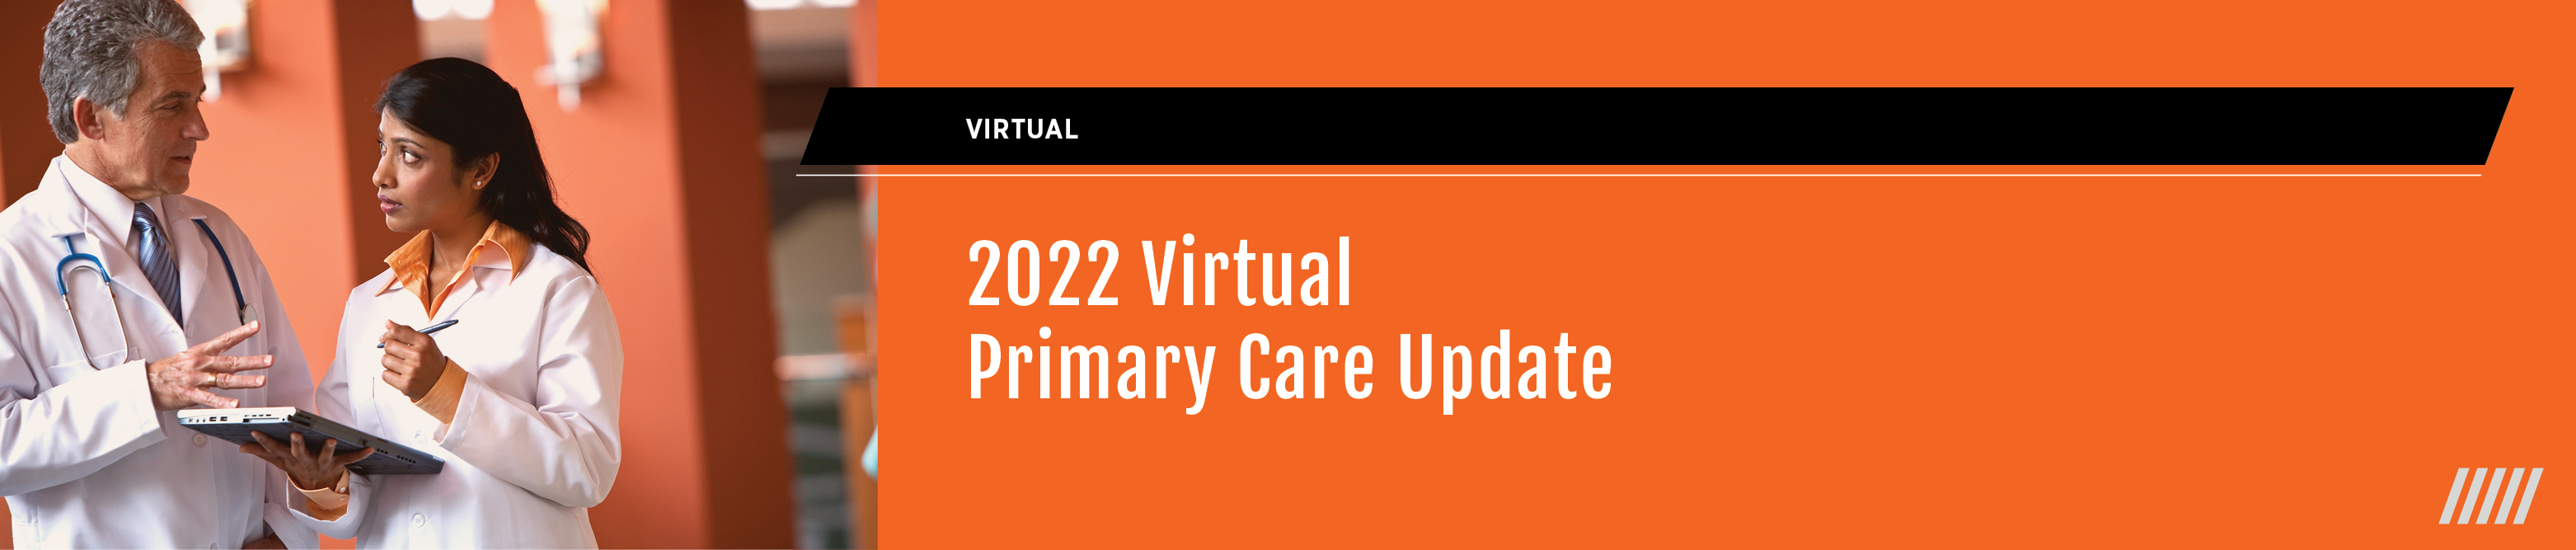 2022 Virtual Primary Care Update Banner